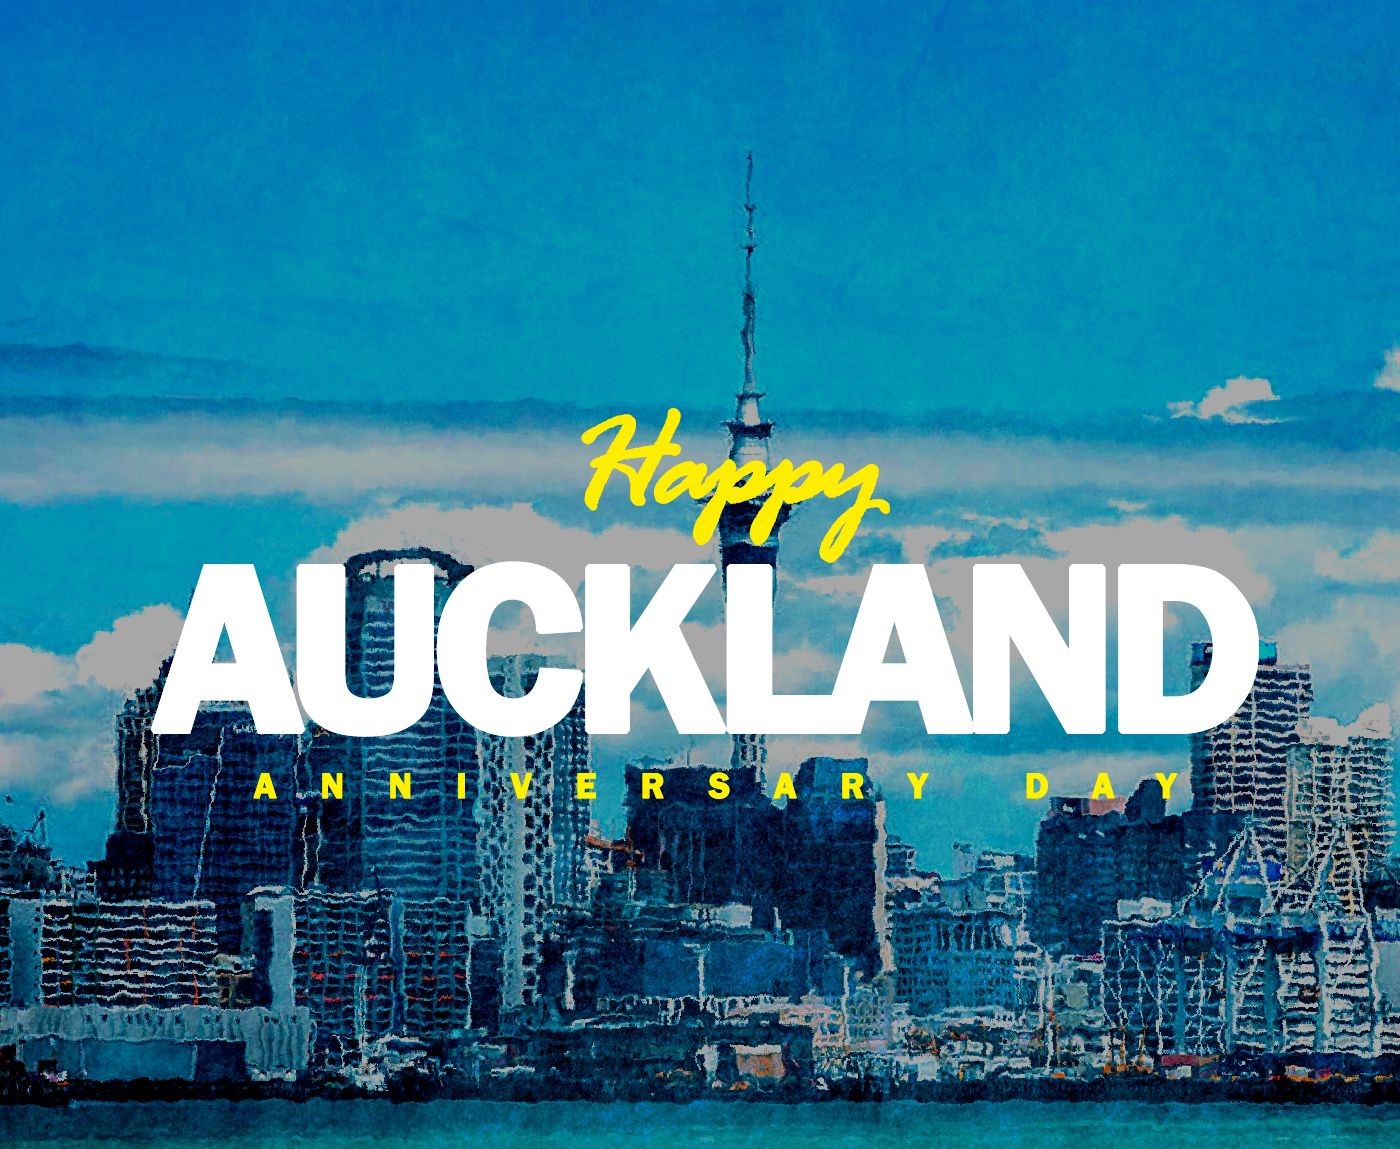 17 Facts About Auckland Anniversary Day